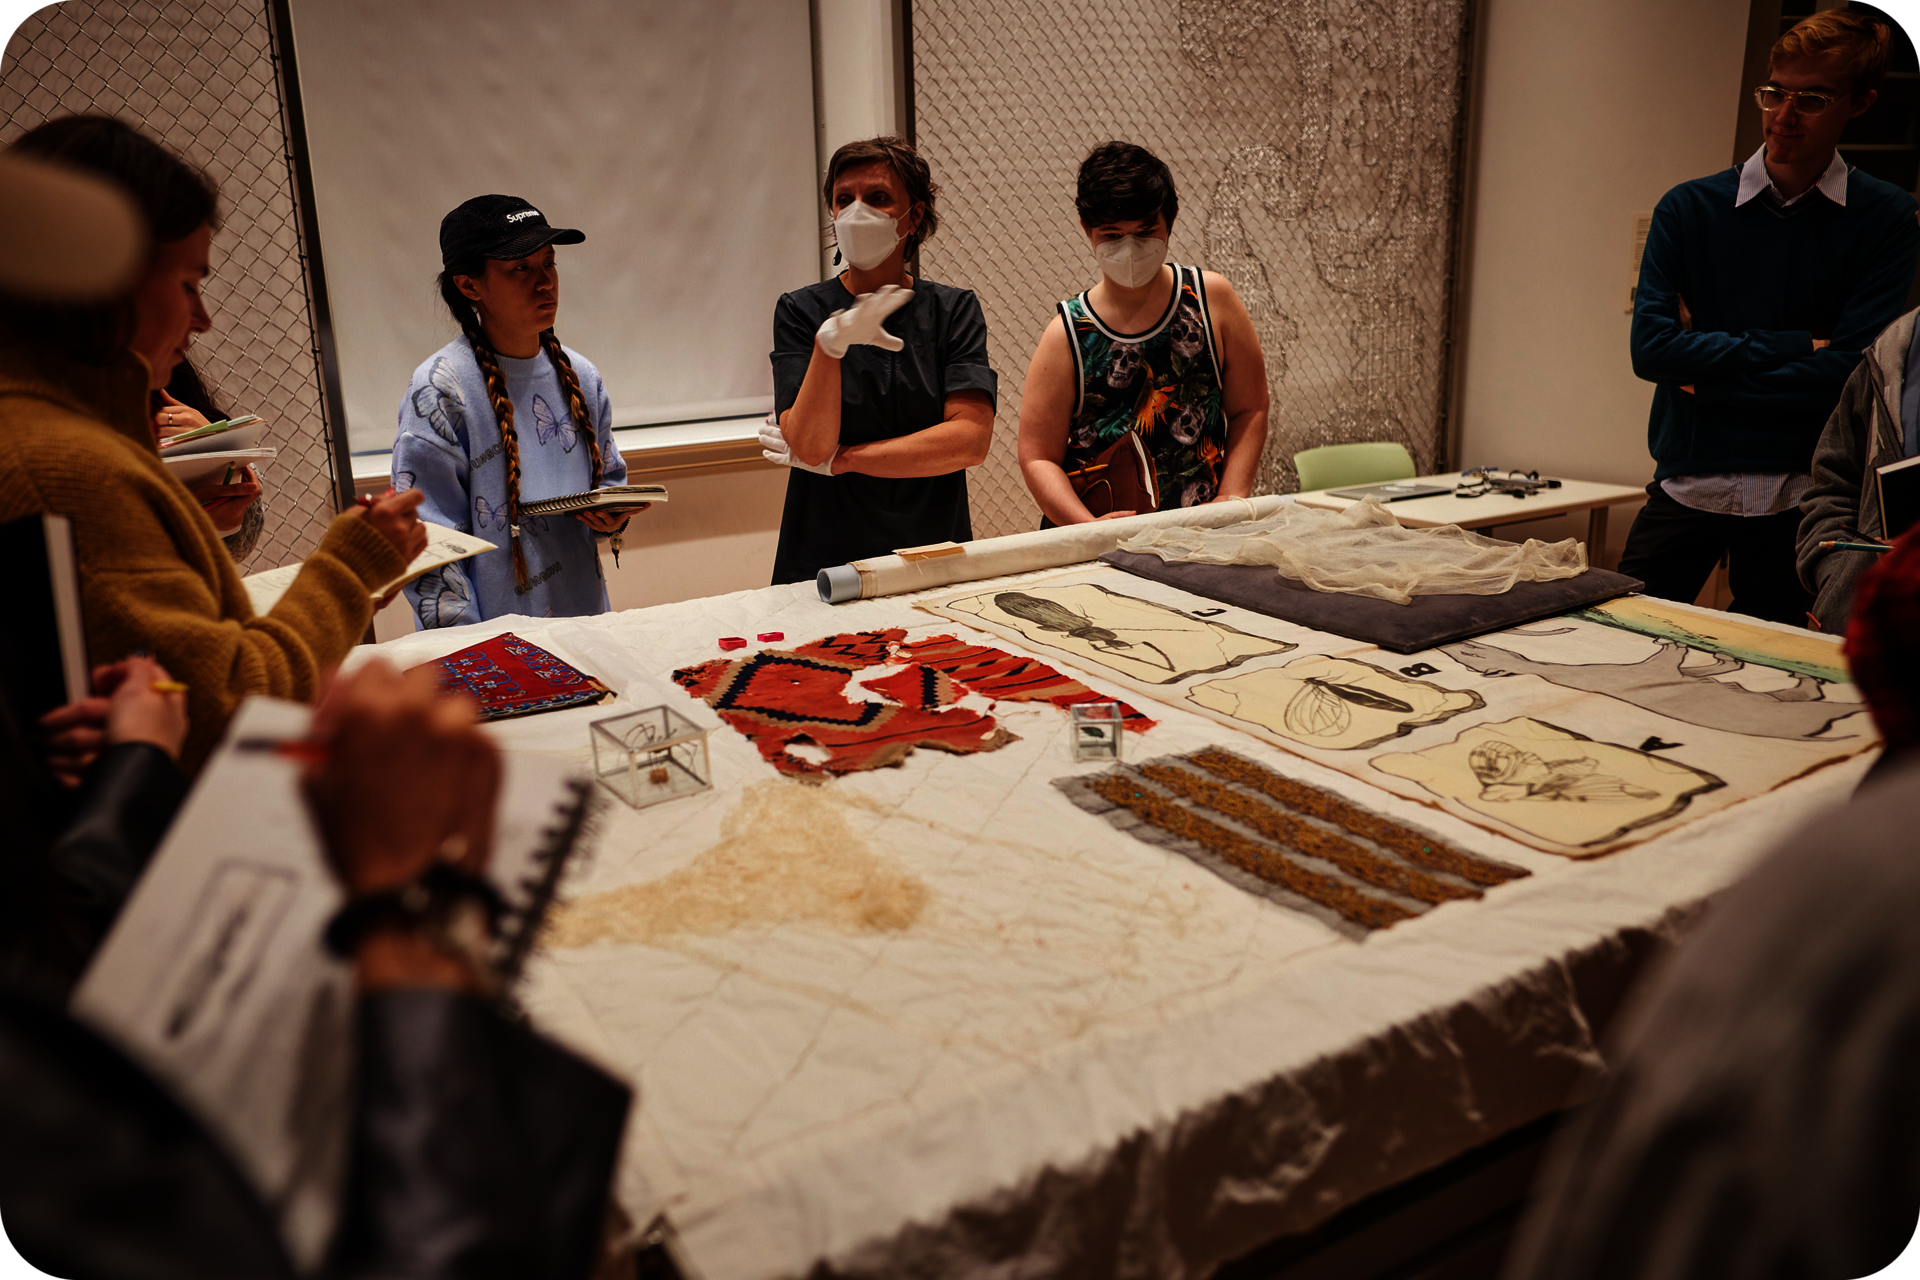 Several people standing around a table displaying various textiles. A person in the center wearing gloves gestures towards another person, while others stare at the textiles on the table. 